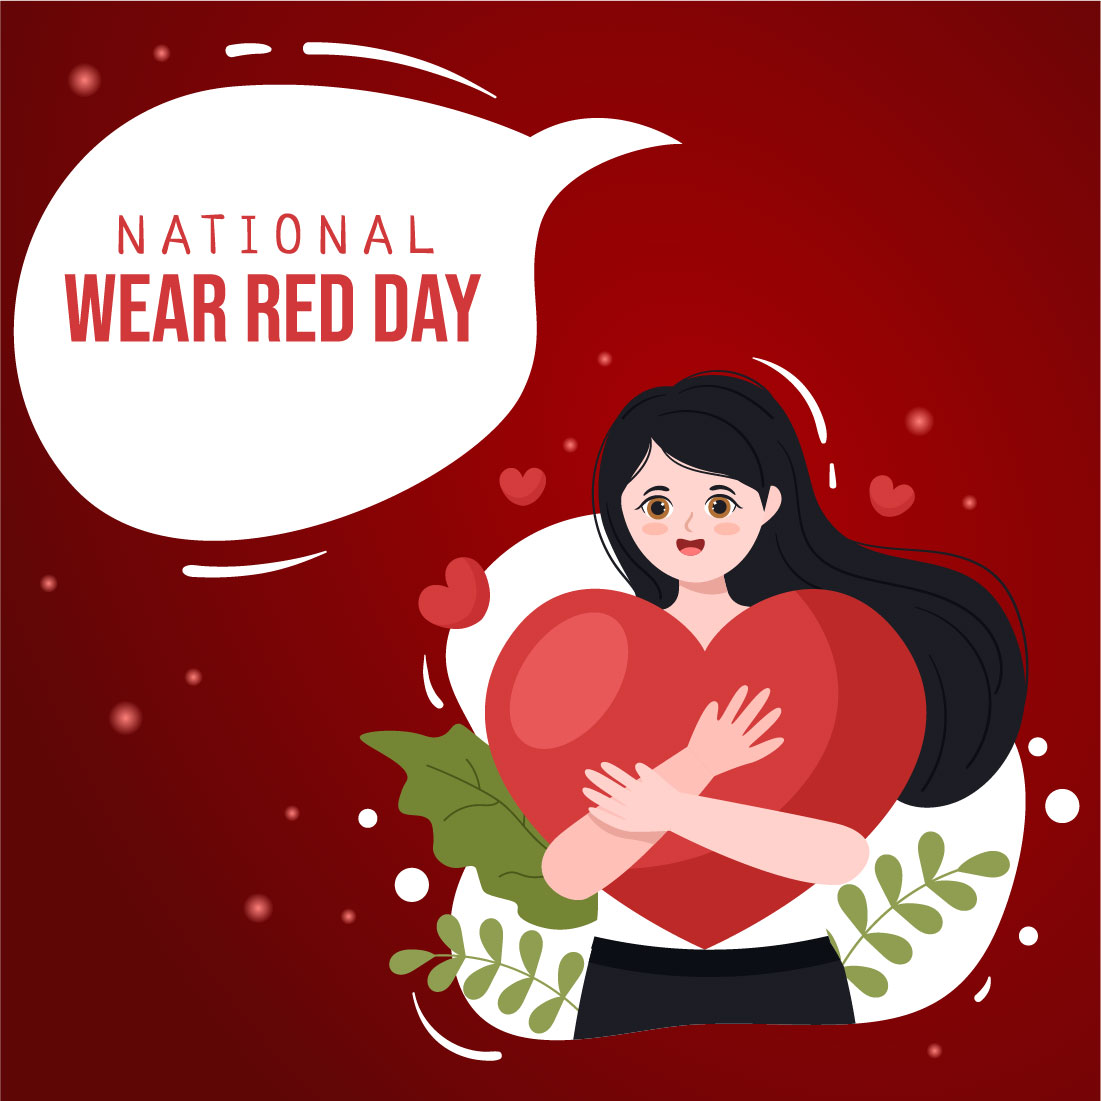 12 National Wear Red Day Illustration preview image.